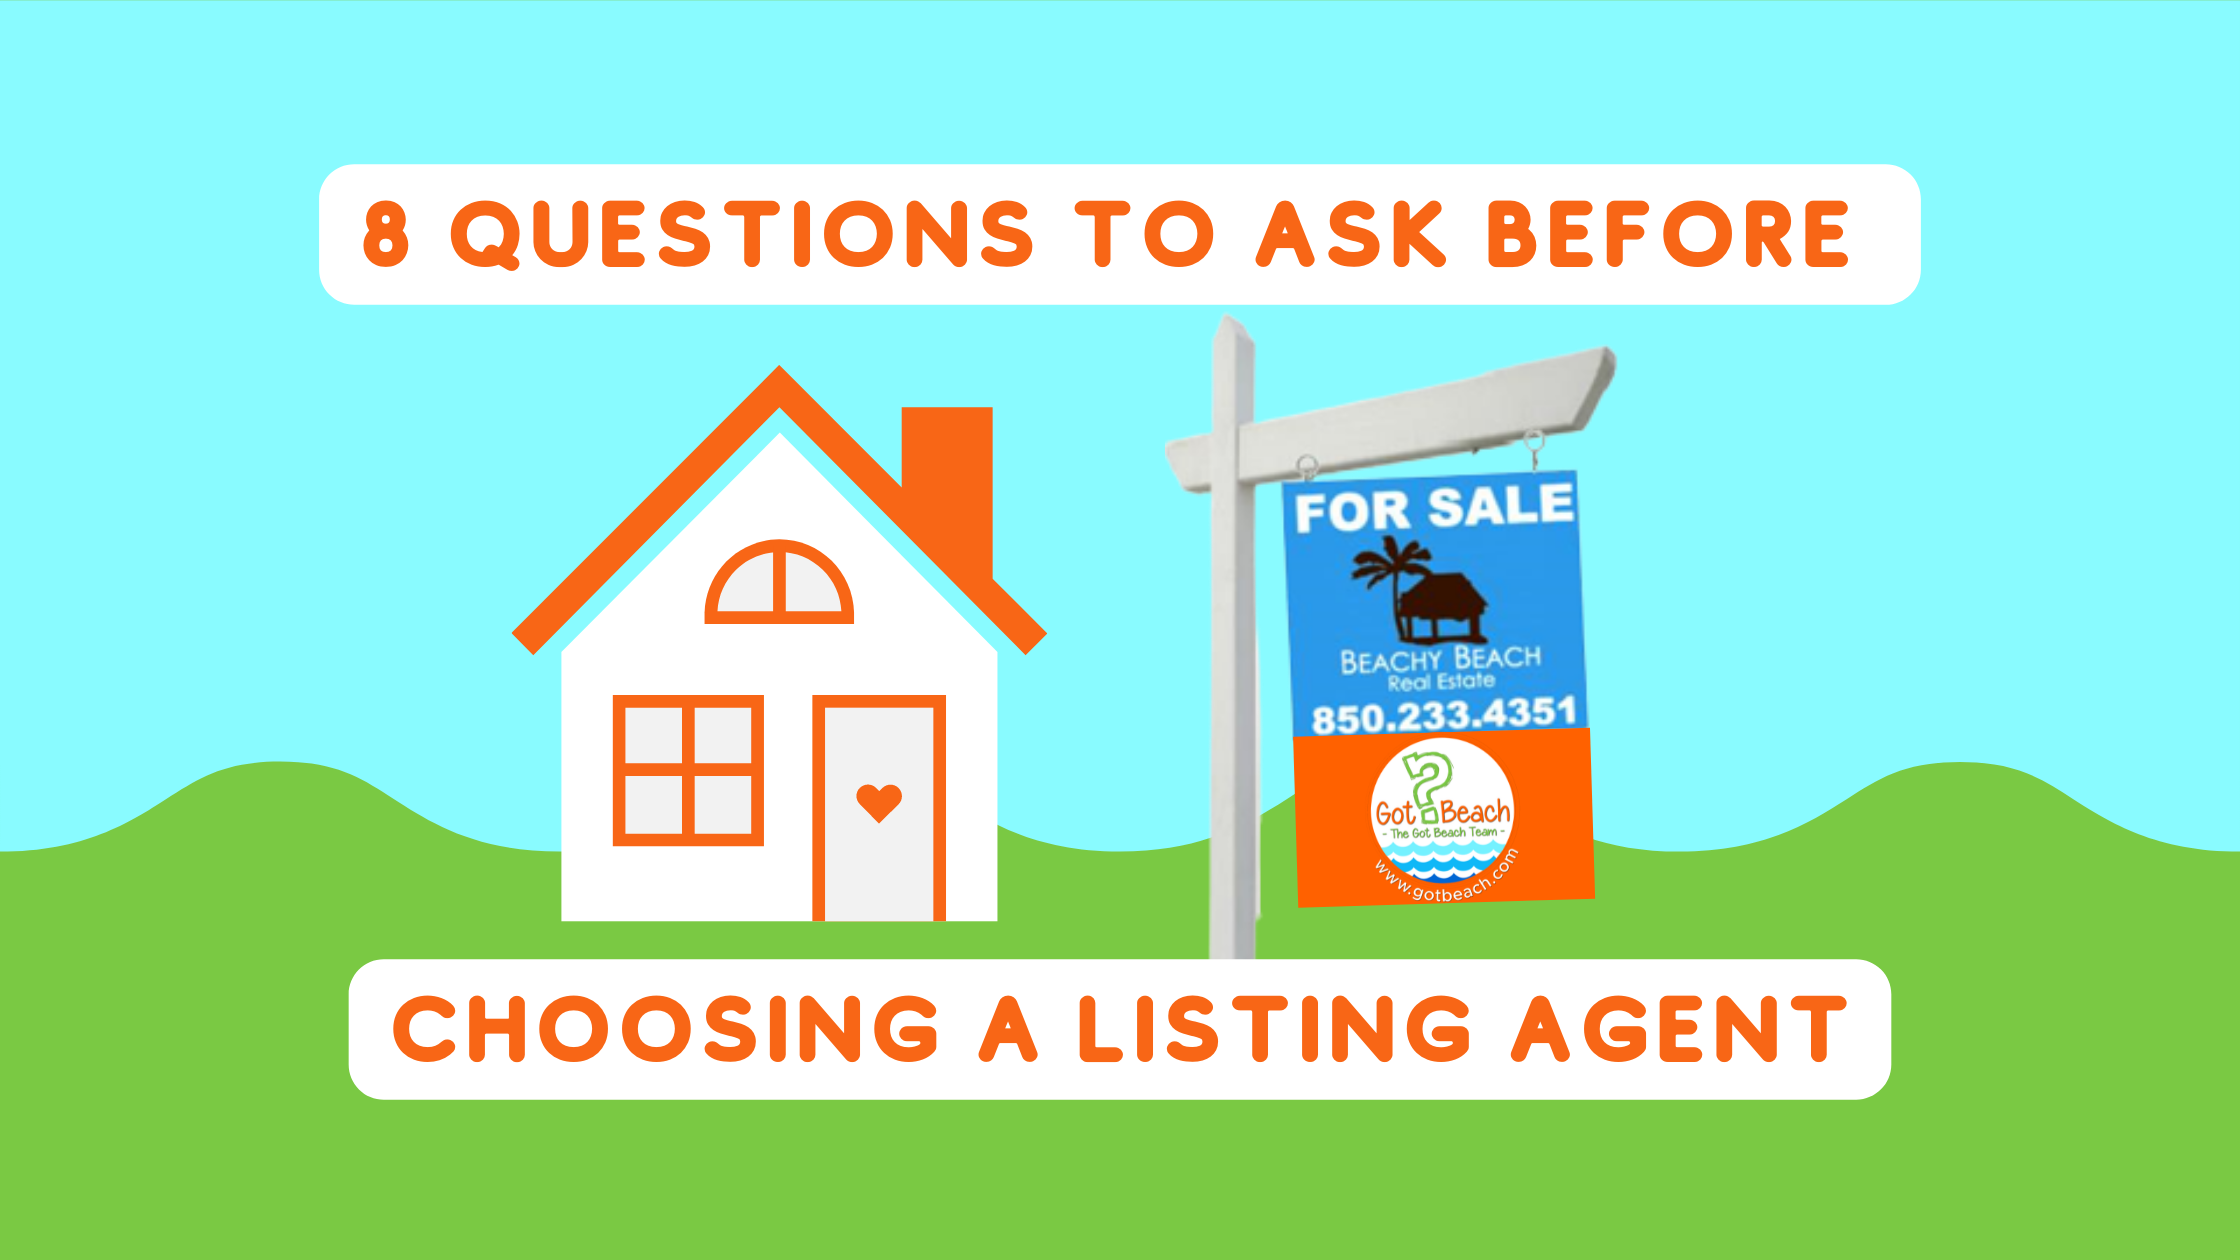 8 questions to ask before choosing a listing agent